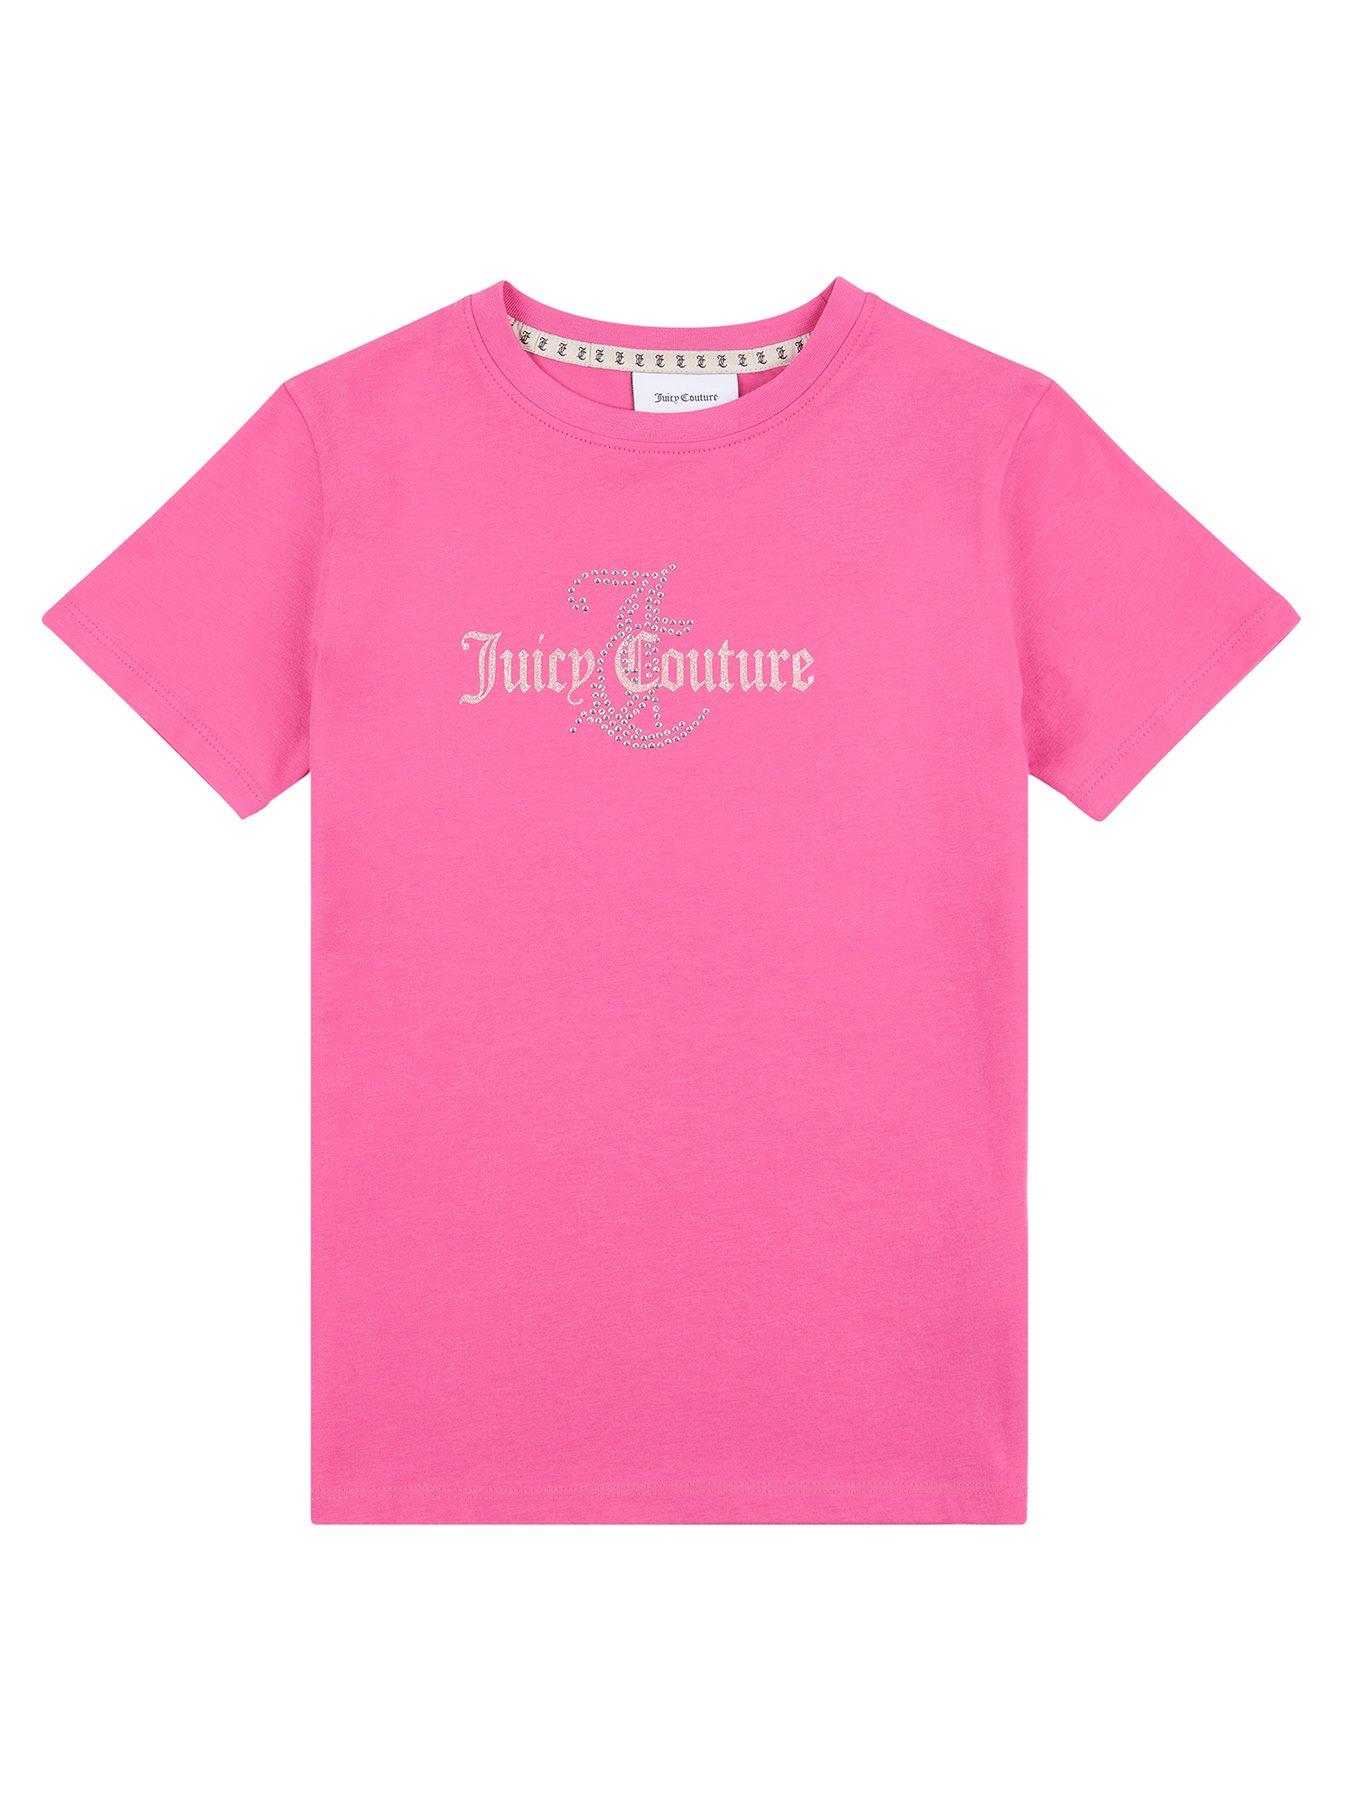 Juicy Couture Girls Diamante Regular Short Sleeve T-shirt - Hot Pink, Bright Pink, Size Age: 15-16 Years, Women